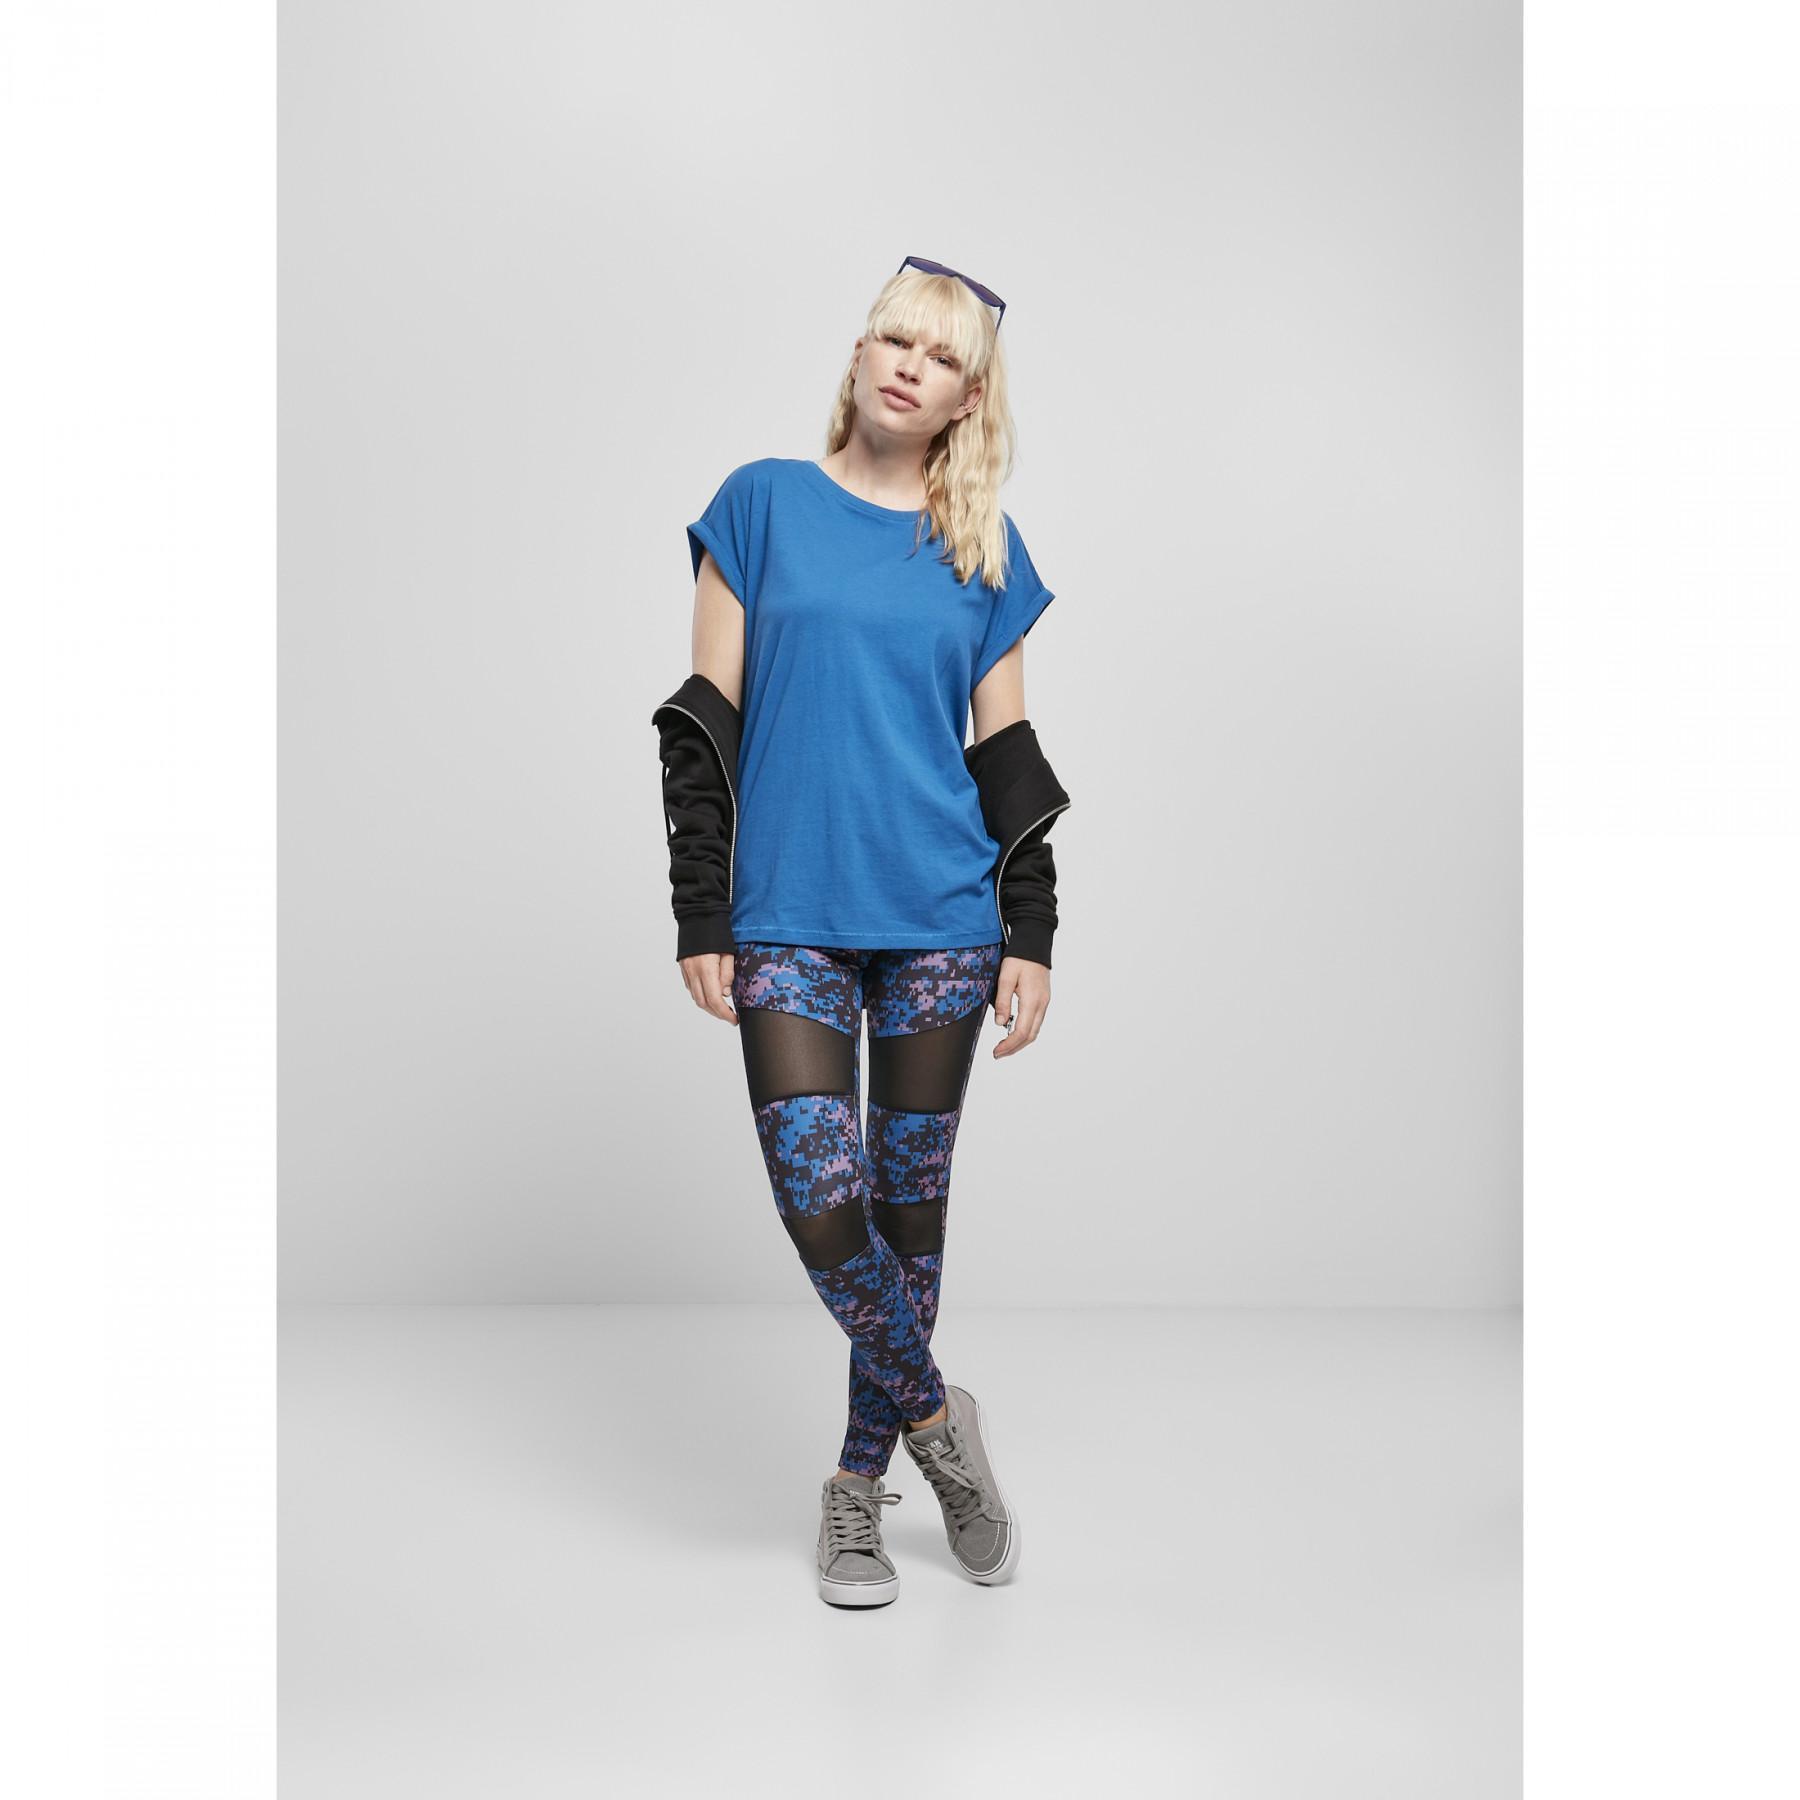 Camiseta Urban Classics mujer Extended Shoulder Tee